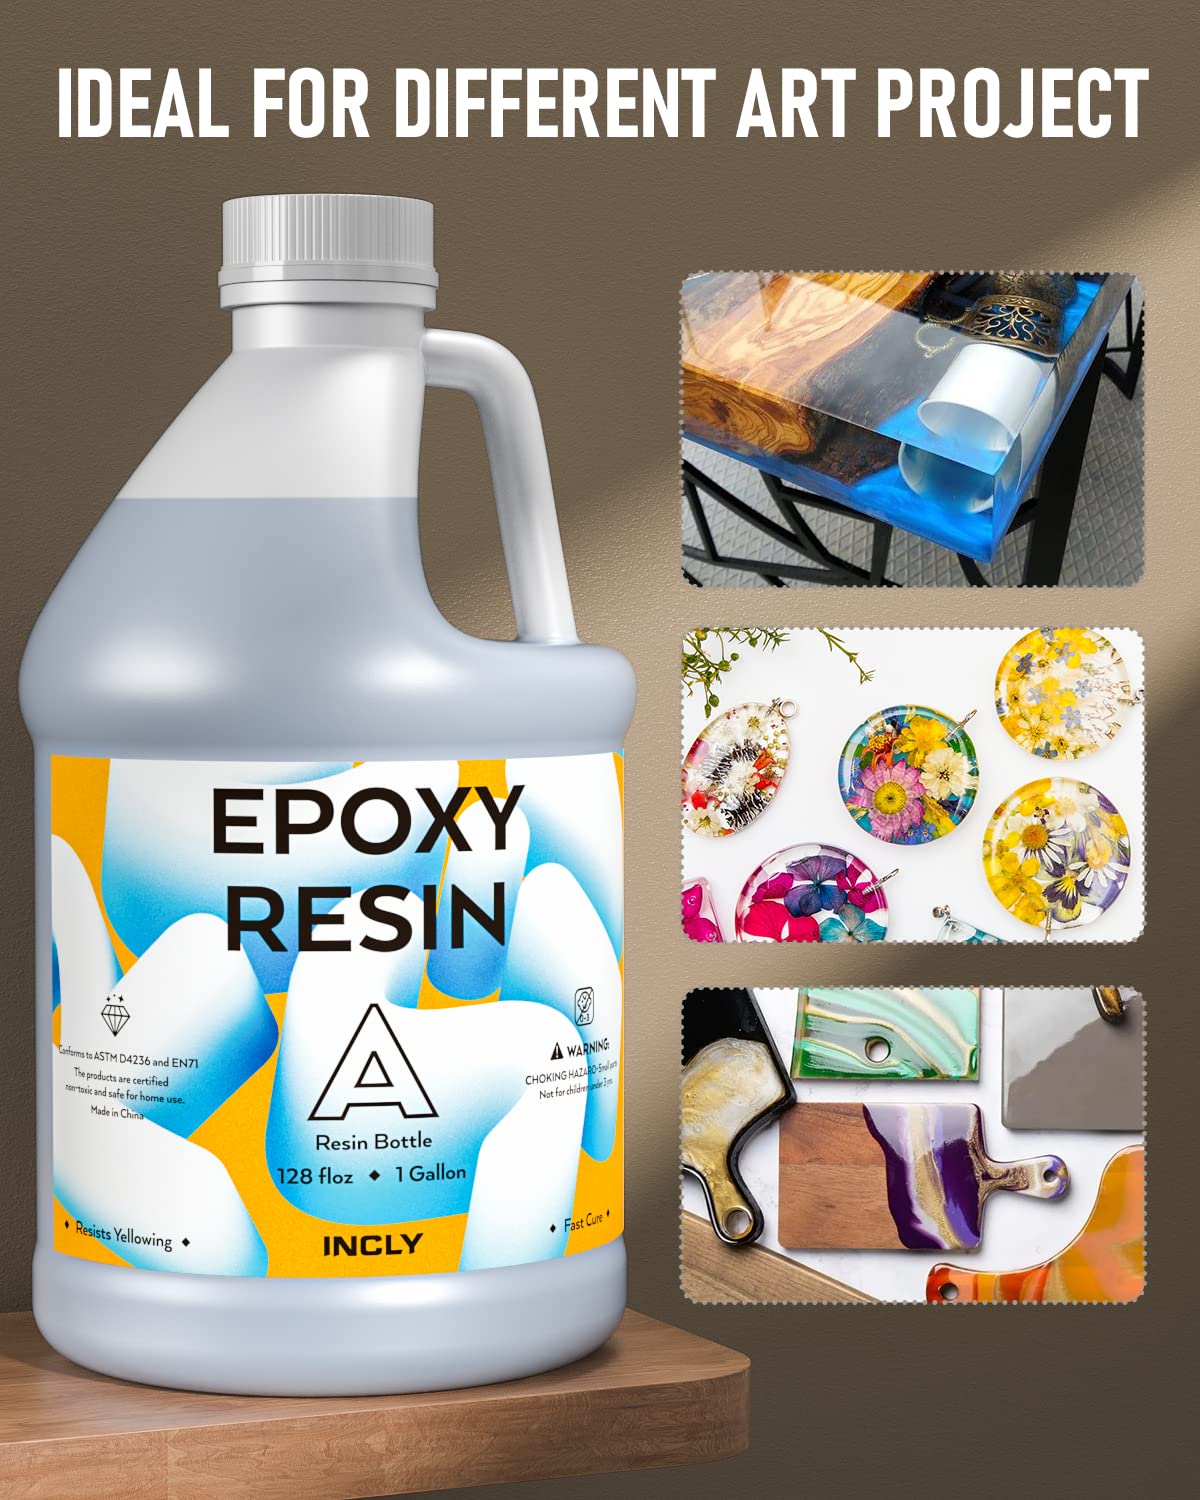 INCLY 4 Gallon Crystal Clear Epoxy Resin Kit, High Gloss & Bubbles Free Resin Supplies Coating & Casting Resin for Table Top, Countertop, River